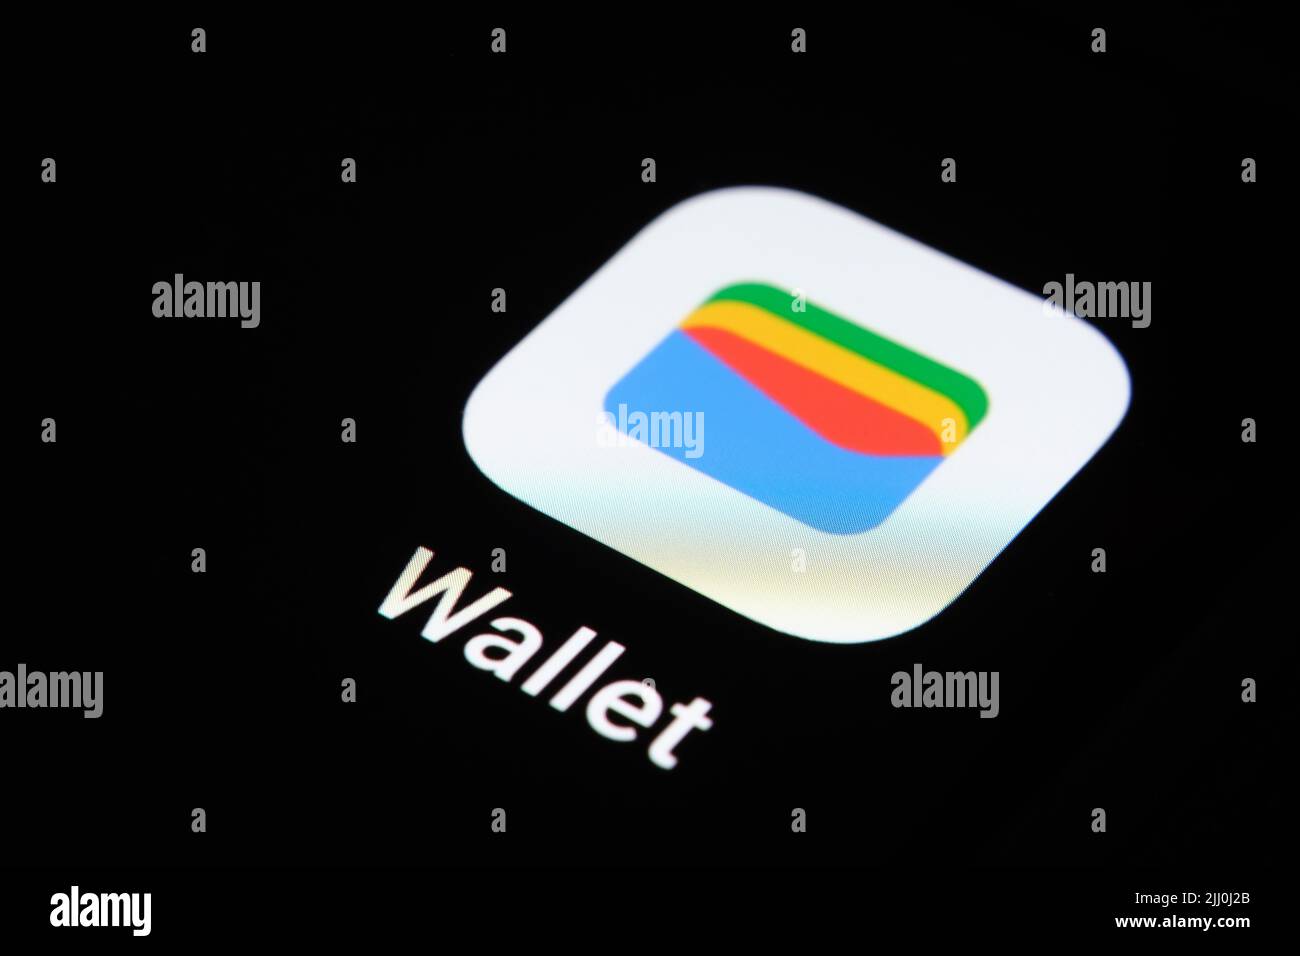 New Google Wallet app seen on the screen of smartphone. Google Pay rebranded to Google Wallet. Stafford, United Kingdom, July 21, 2022 Stock Photo